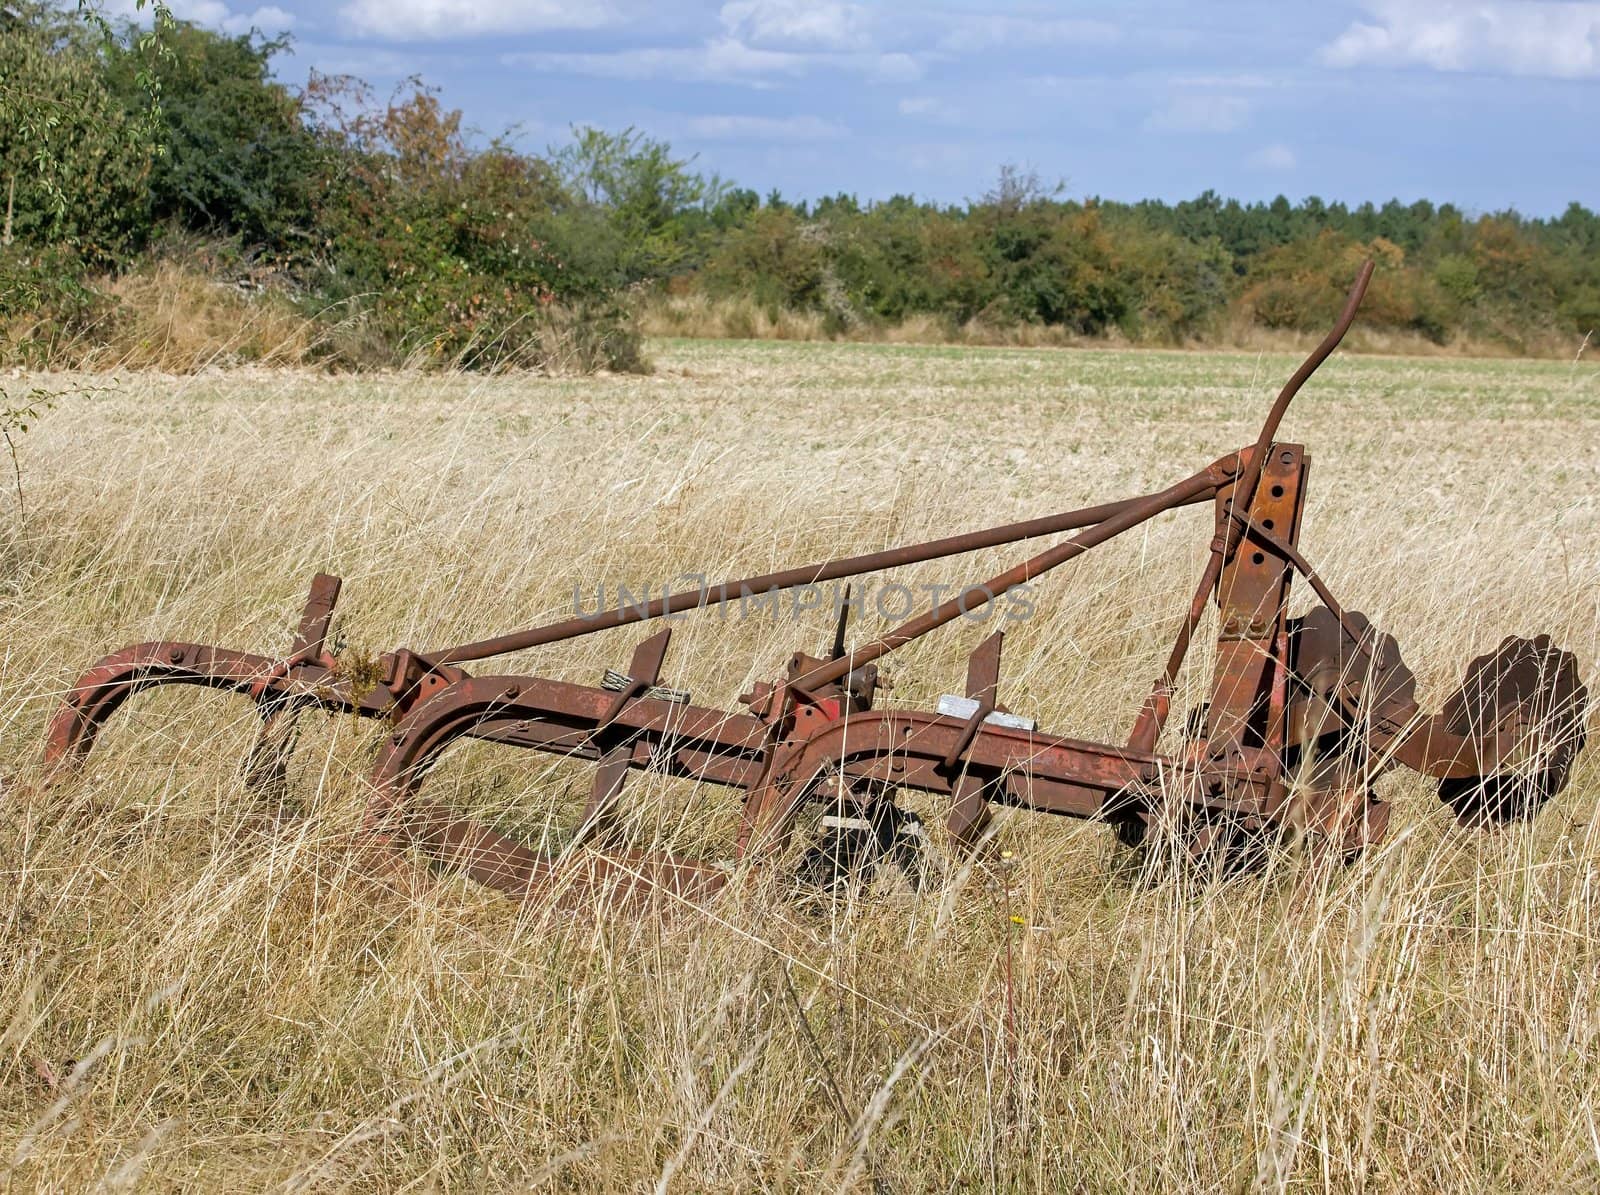 old agricultural machine, abandoned in a field